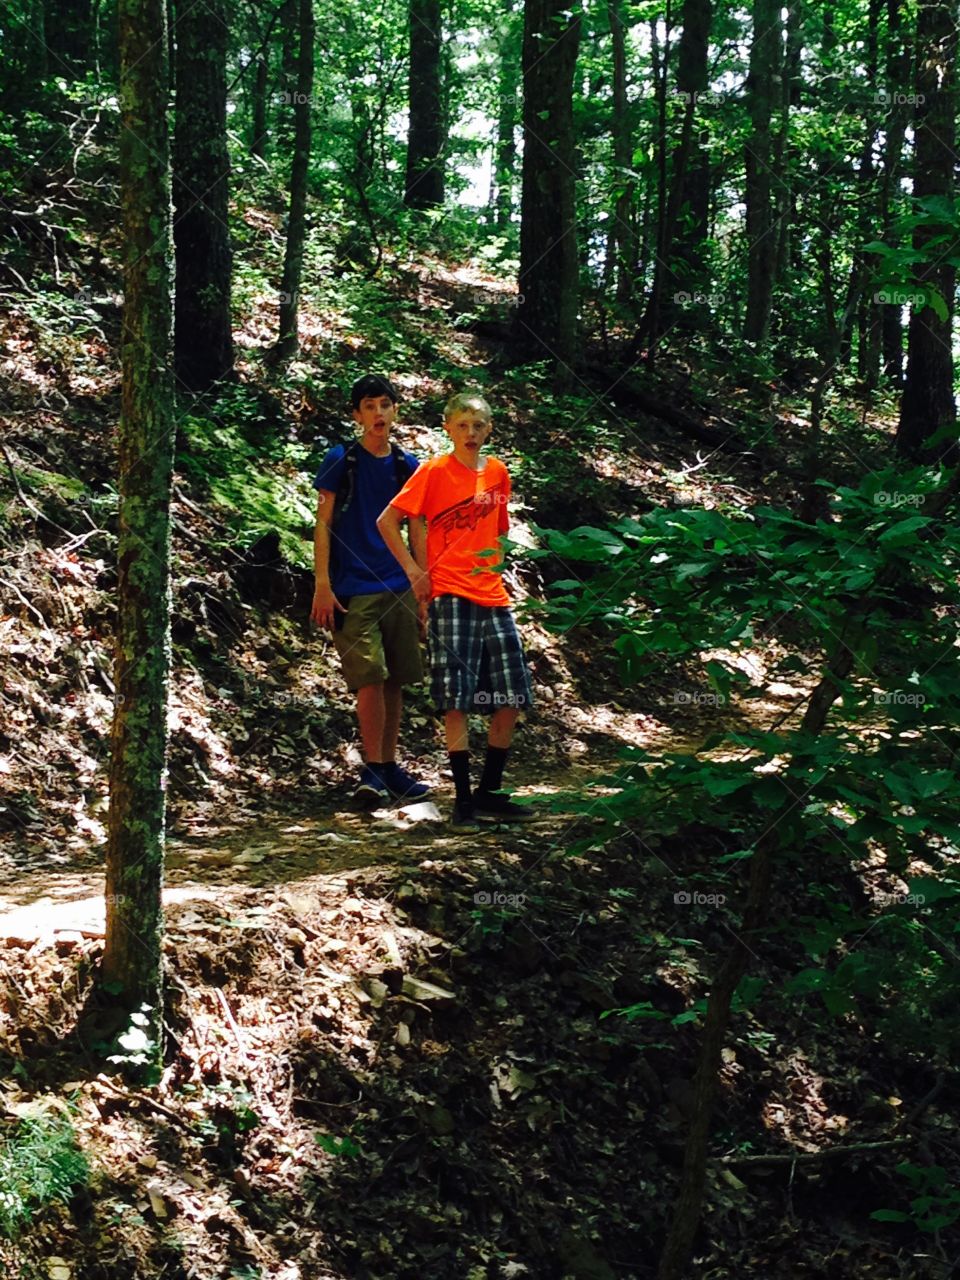 Nature walk. Two young boys walking the trail in the mountains